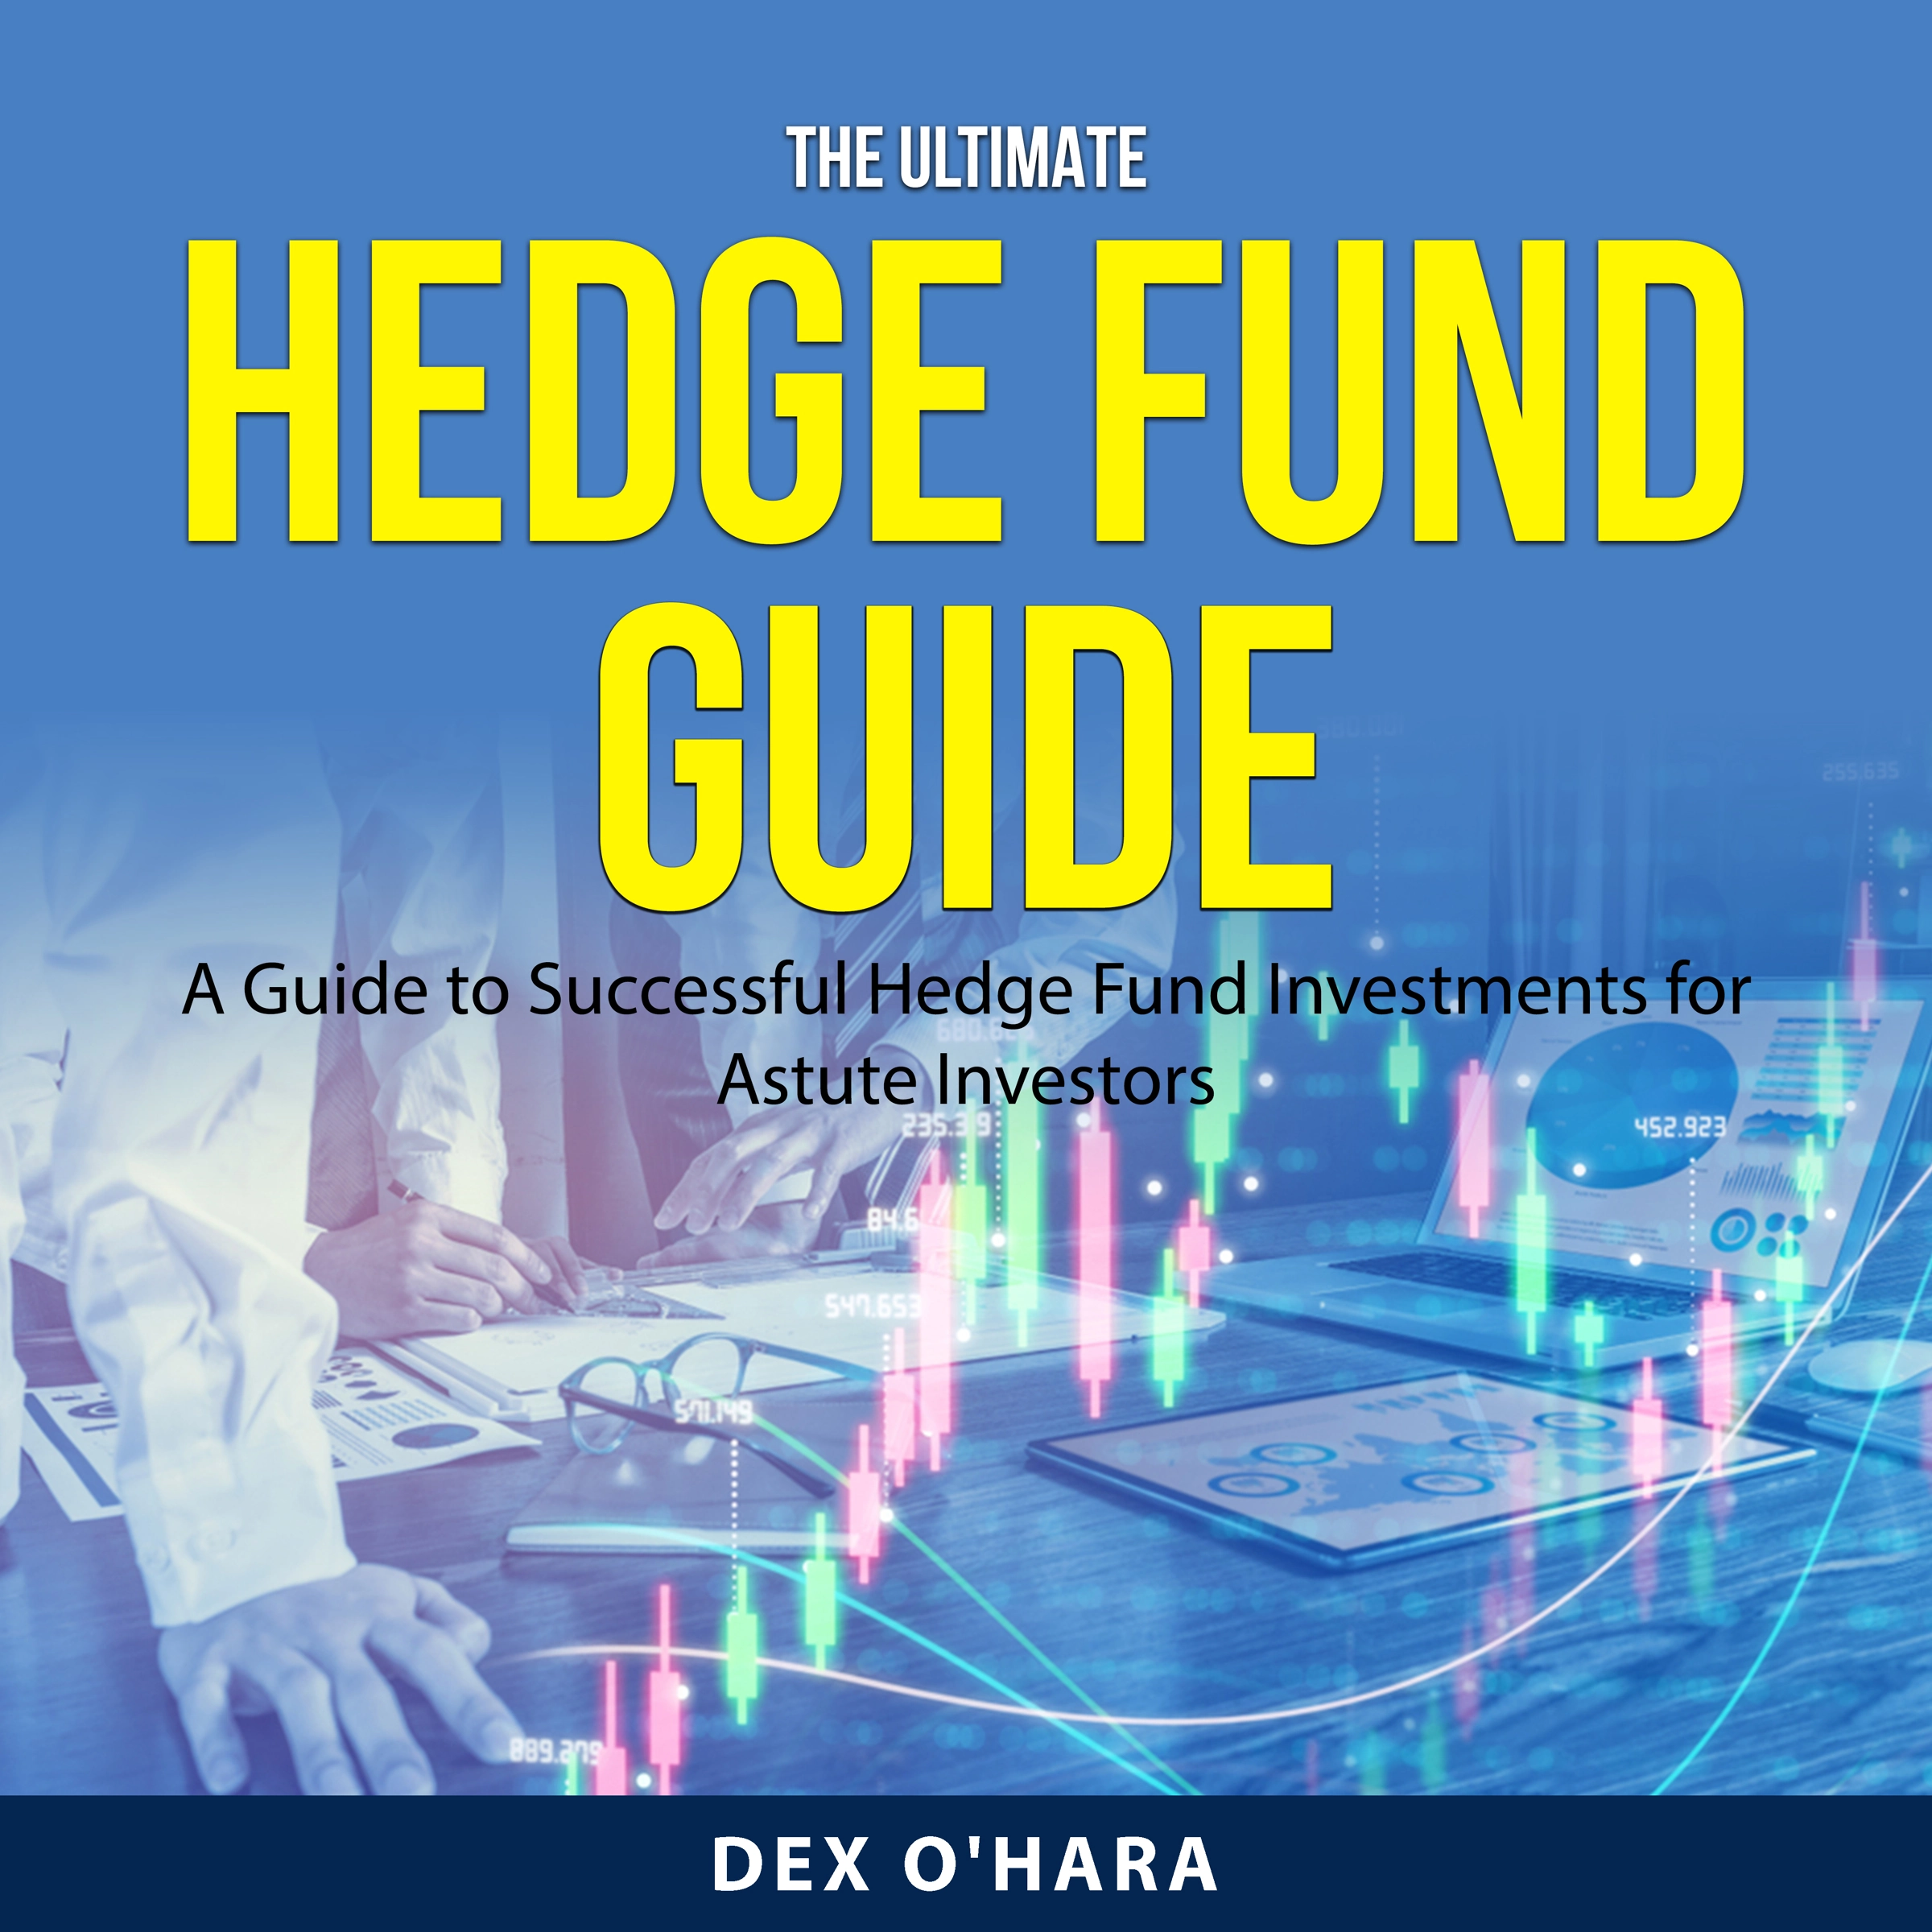 The Ultimate Hedge Fund Guide by Dex O'Hara Audiobook